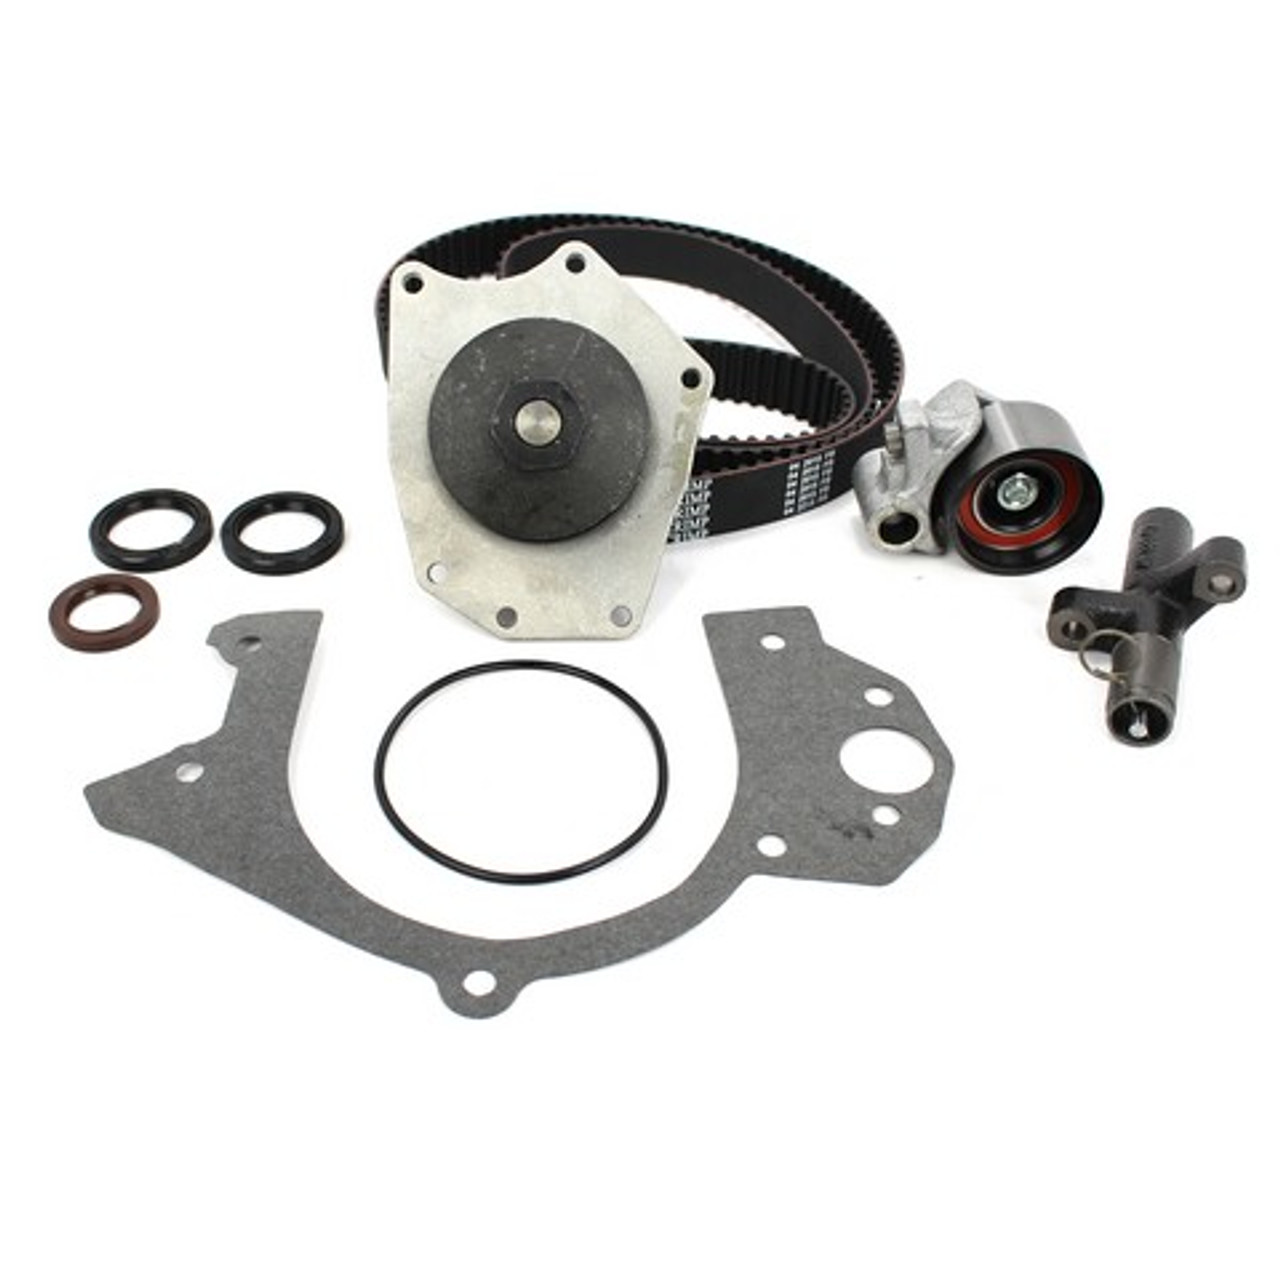 Timing Belt Kit with Water Pump 3.5L 1997 Plymouth Prowler - TBK1145BWP.5